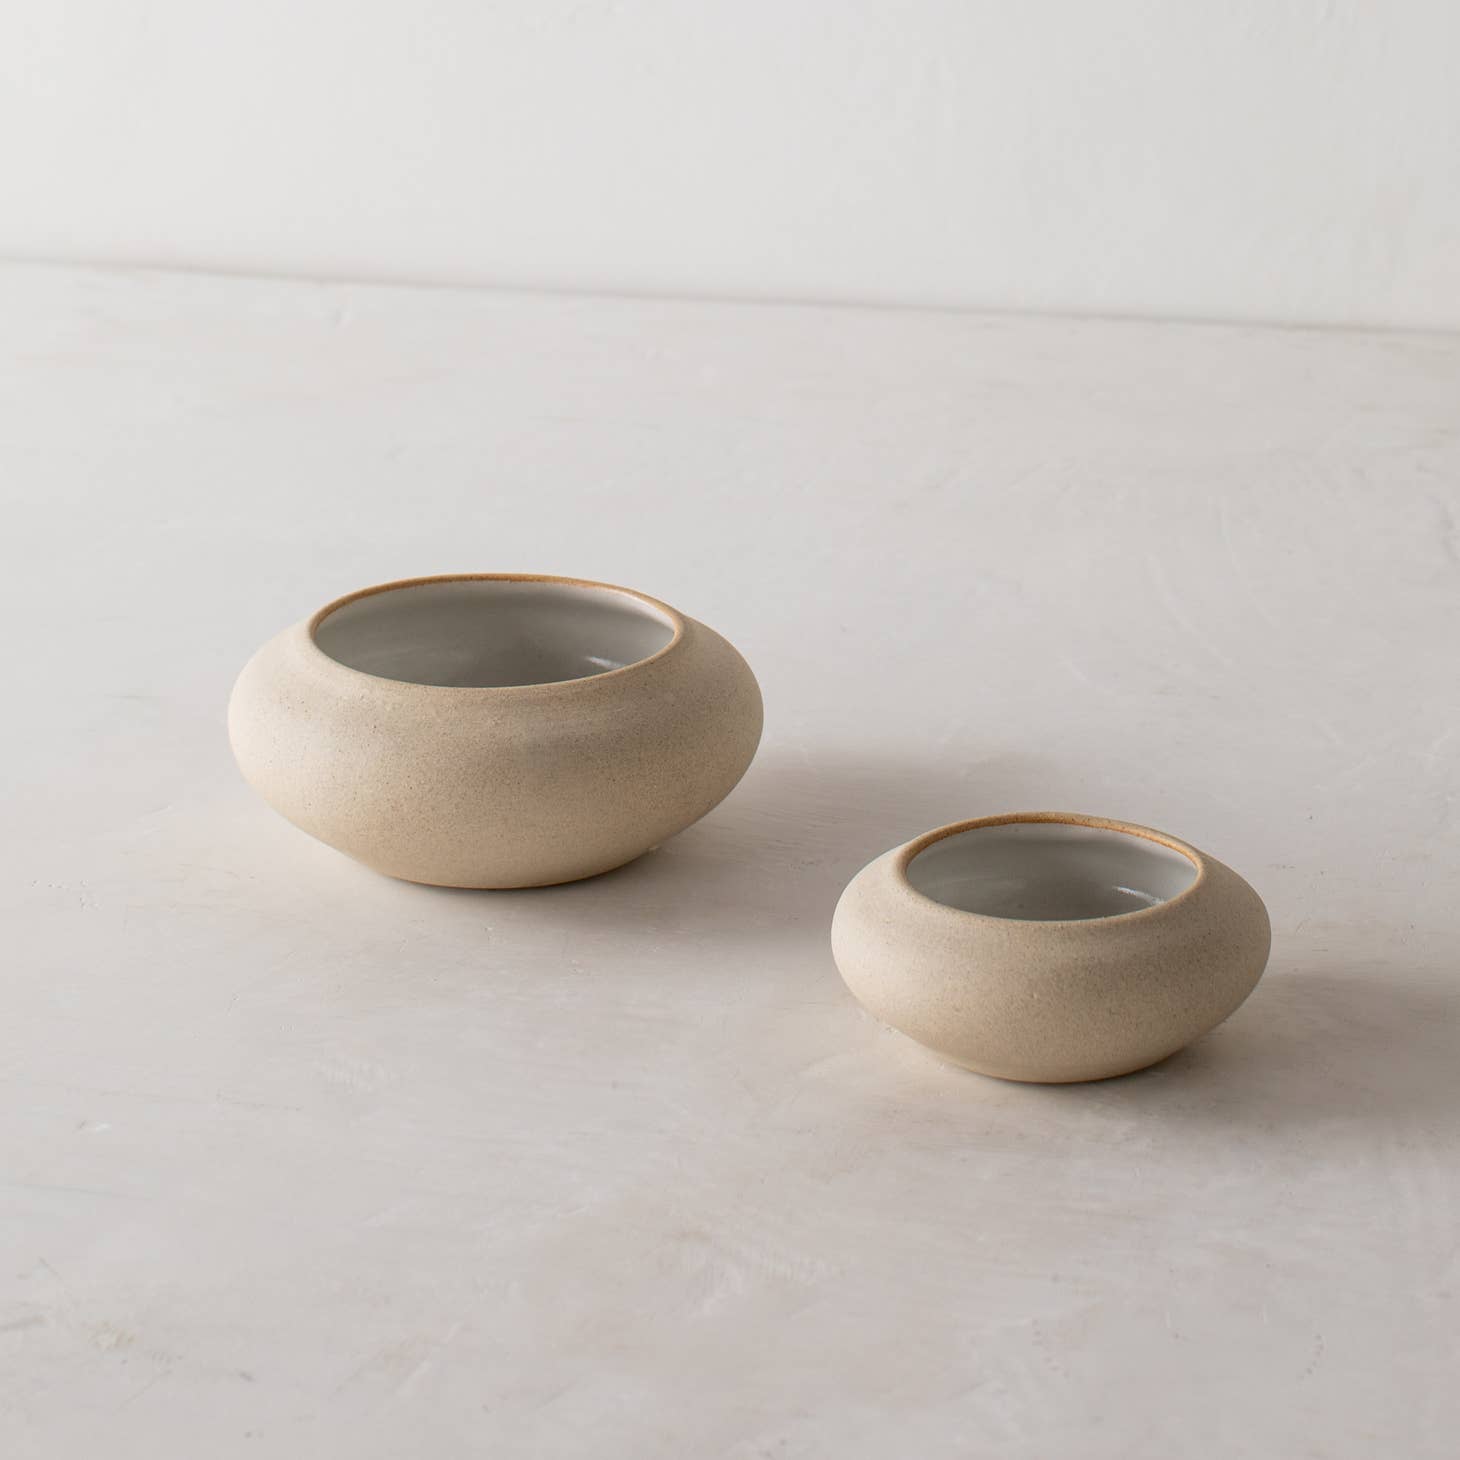 convivial ikebana no 2 vase / Slow down and enjoy the subtle beauty of nature with a handmade ceramic ikebana vase. This round, shallow vase is designed for minimal, ikebana inspired arrangements. Handmade with proprietary sandstone with an ivory glaze on the interior.